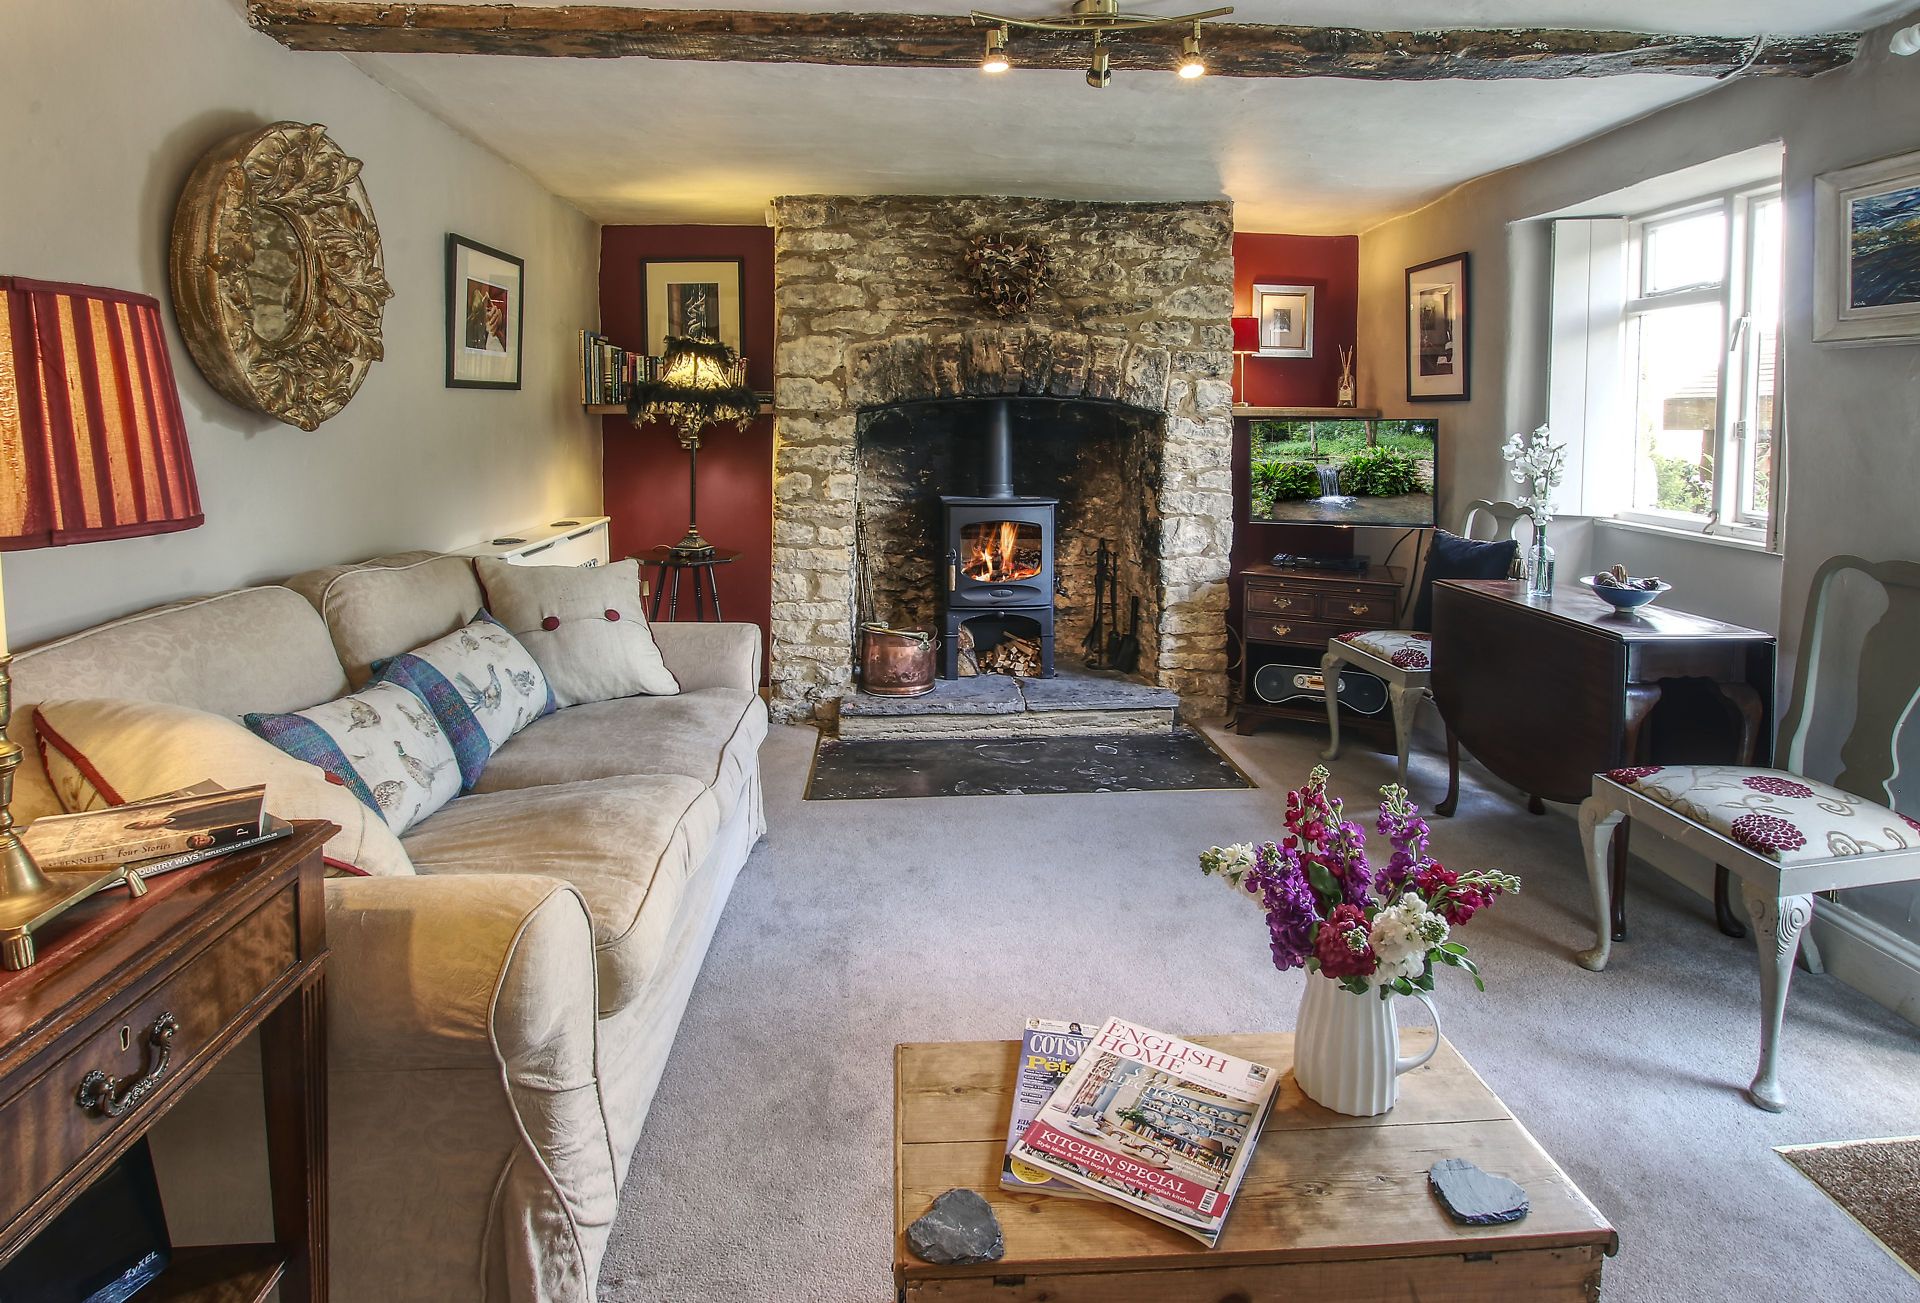 Bay Tree Cottage is located in Shipton-under-Wychwood